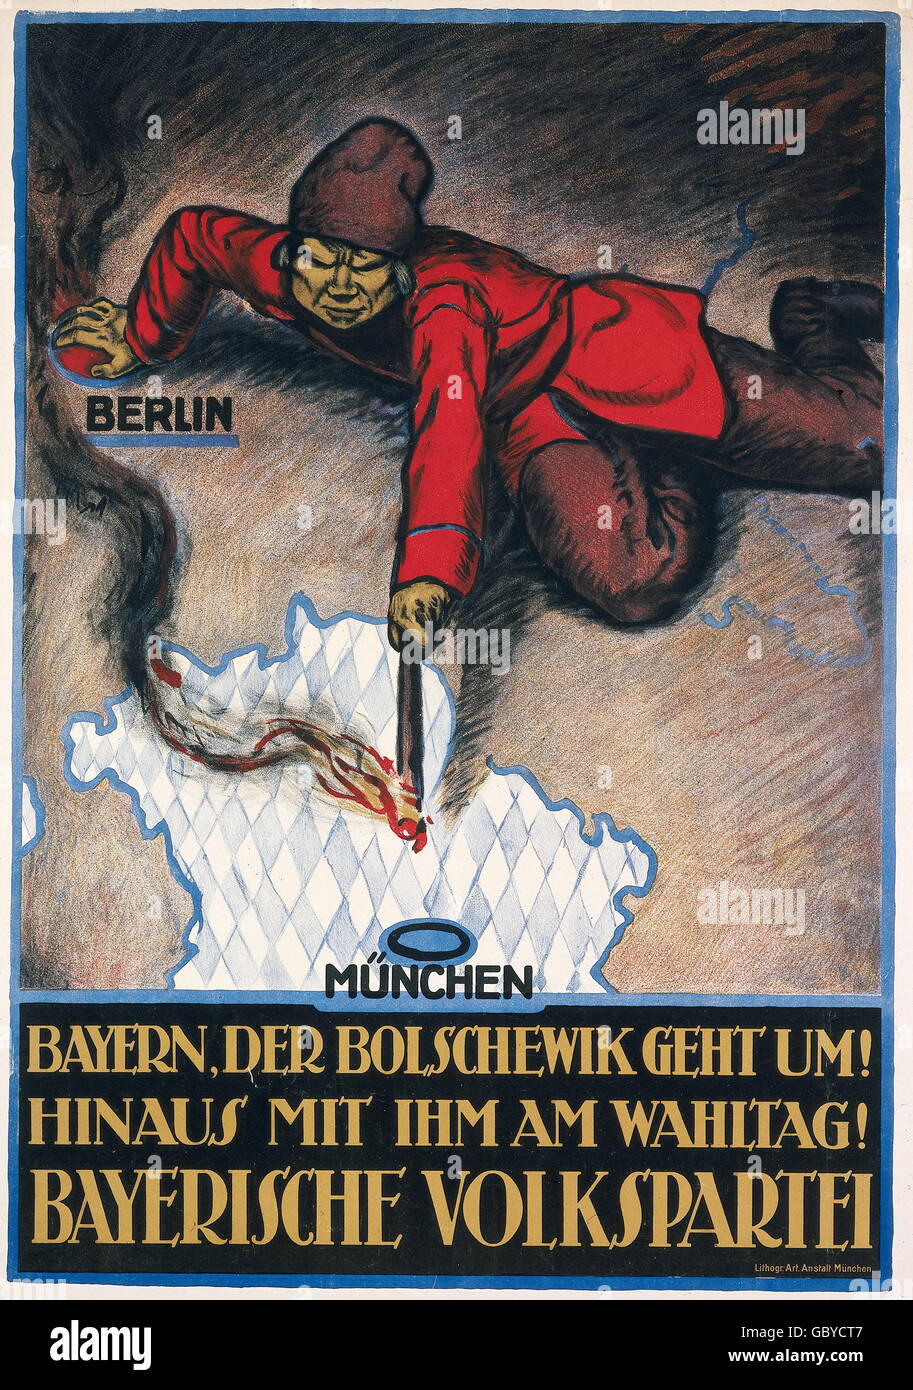 geography / travel, Germany, politics, elections, election poster 'Bayern, der Bolschewik geht um!' (Bavaria, the Bolshevik is haunting), Bavarian Folk party, 1919, Additional-Rights-Clearences-Not Available Stock Photo